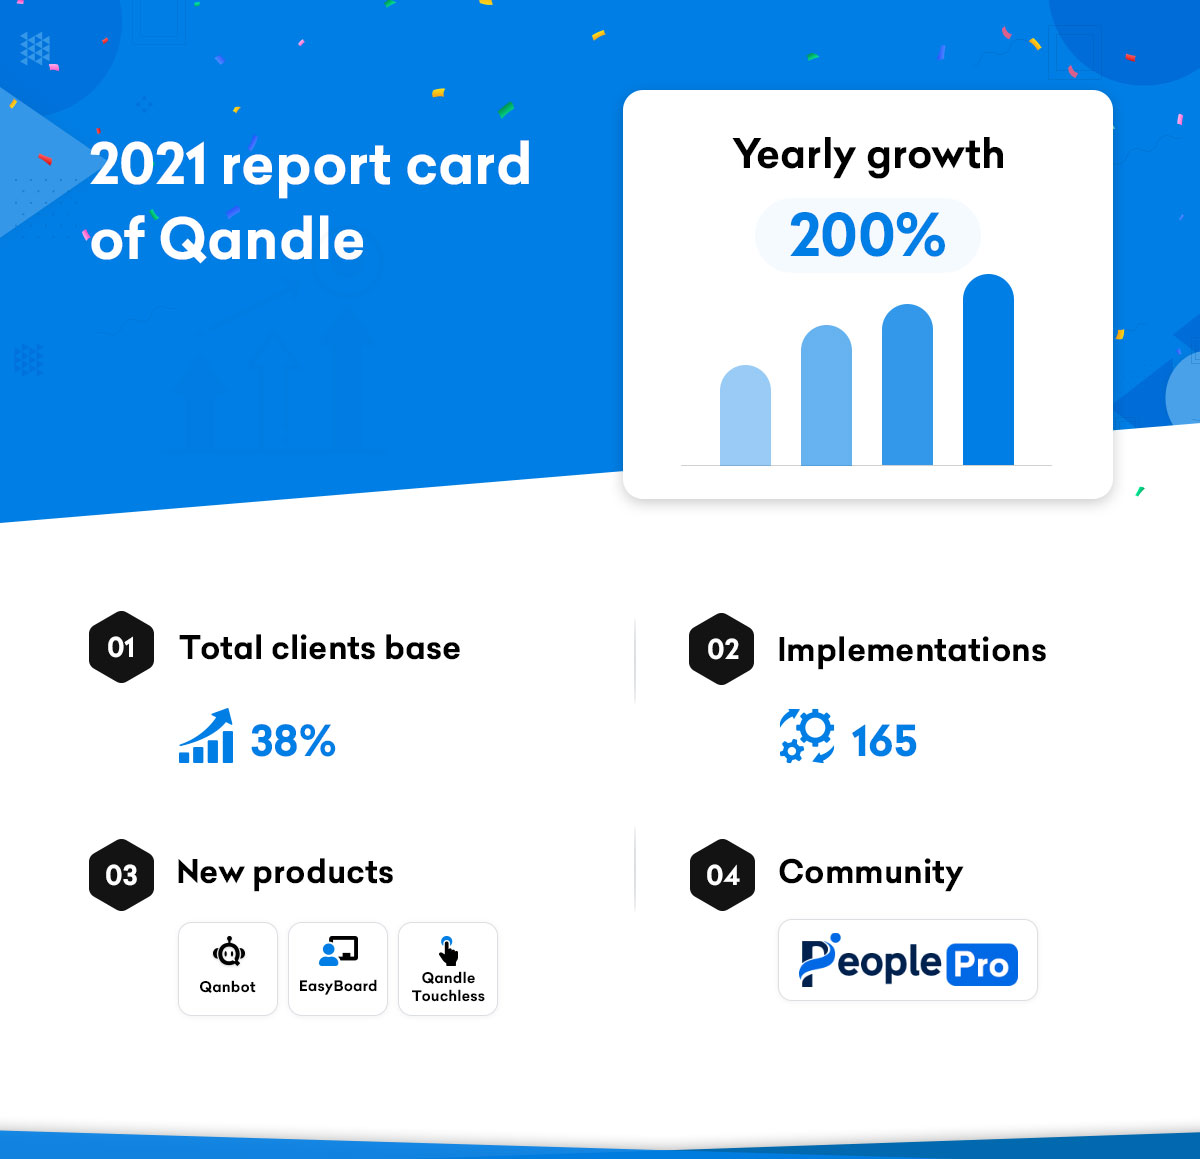 HR Tech startup Qandle, turns profitable, registers 200 percent yearly growth